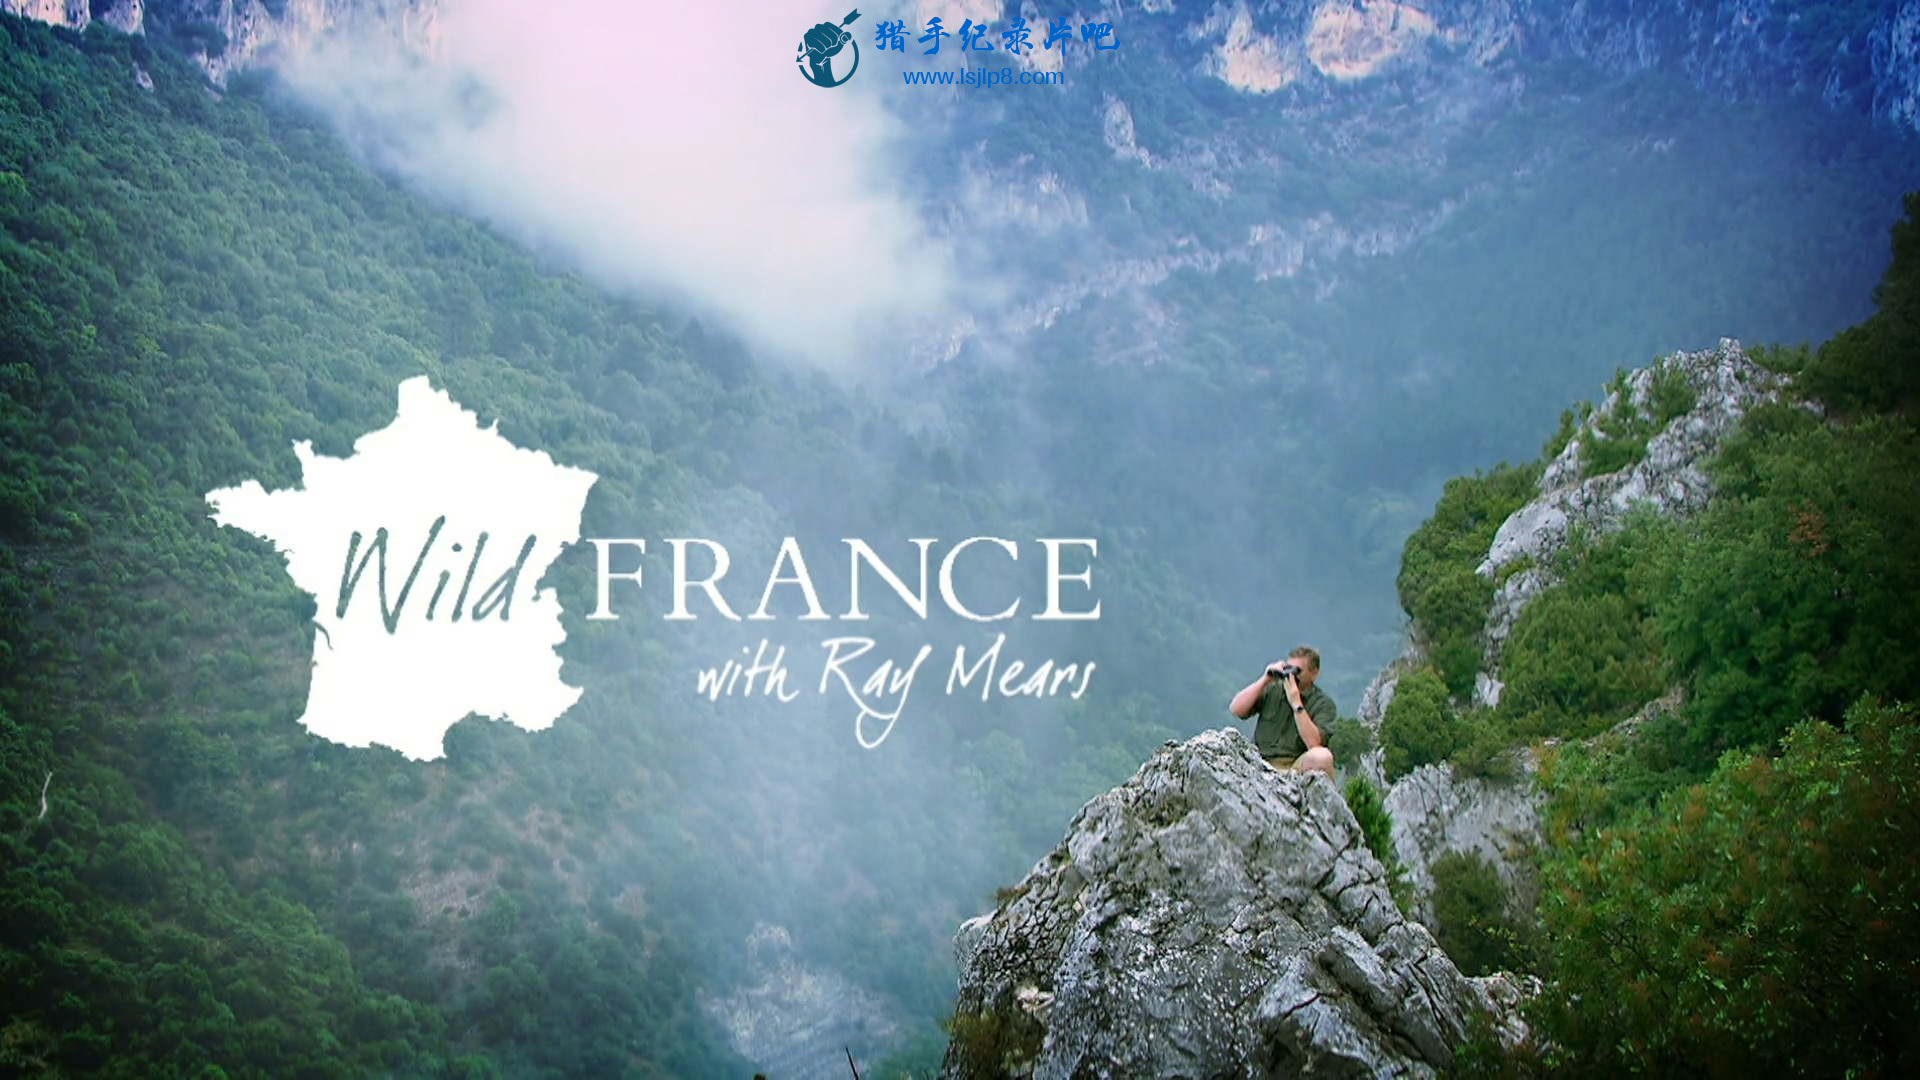 Wild.France.With.Ray.Mears.S01E01.The.Vanoise.1080p.NF.WEB-DL.DD 2.0.x264-monkee.jpg